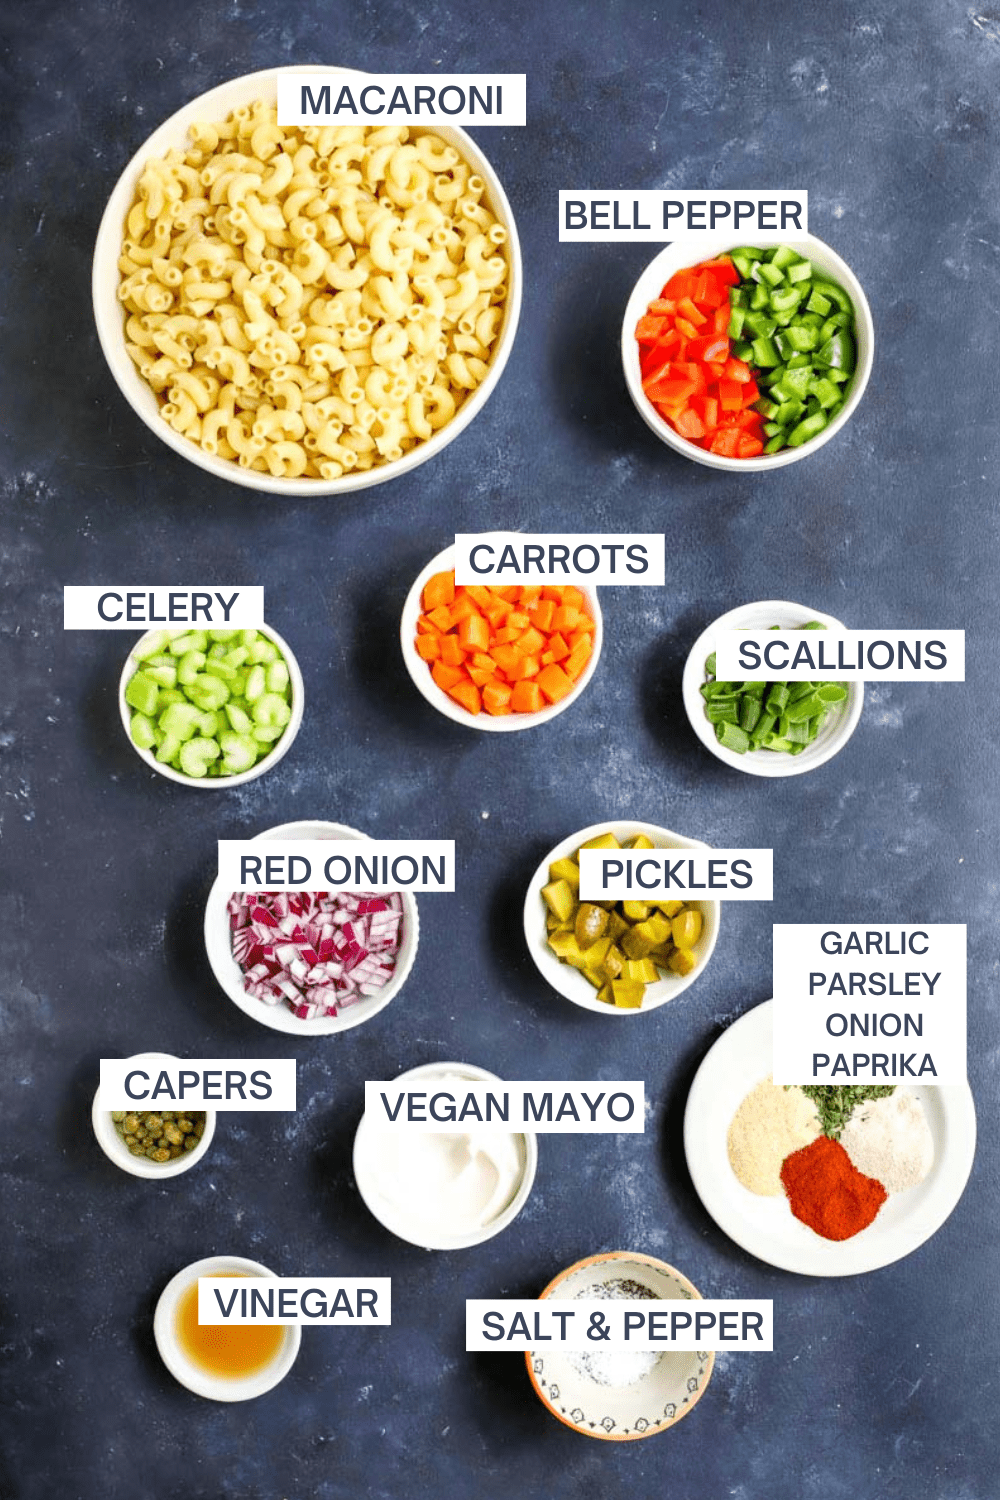 Ingredients for vegan macaroni salad with labels over each ingredient.